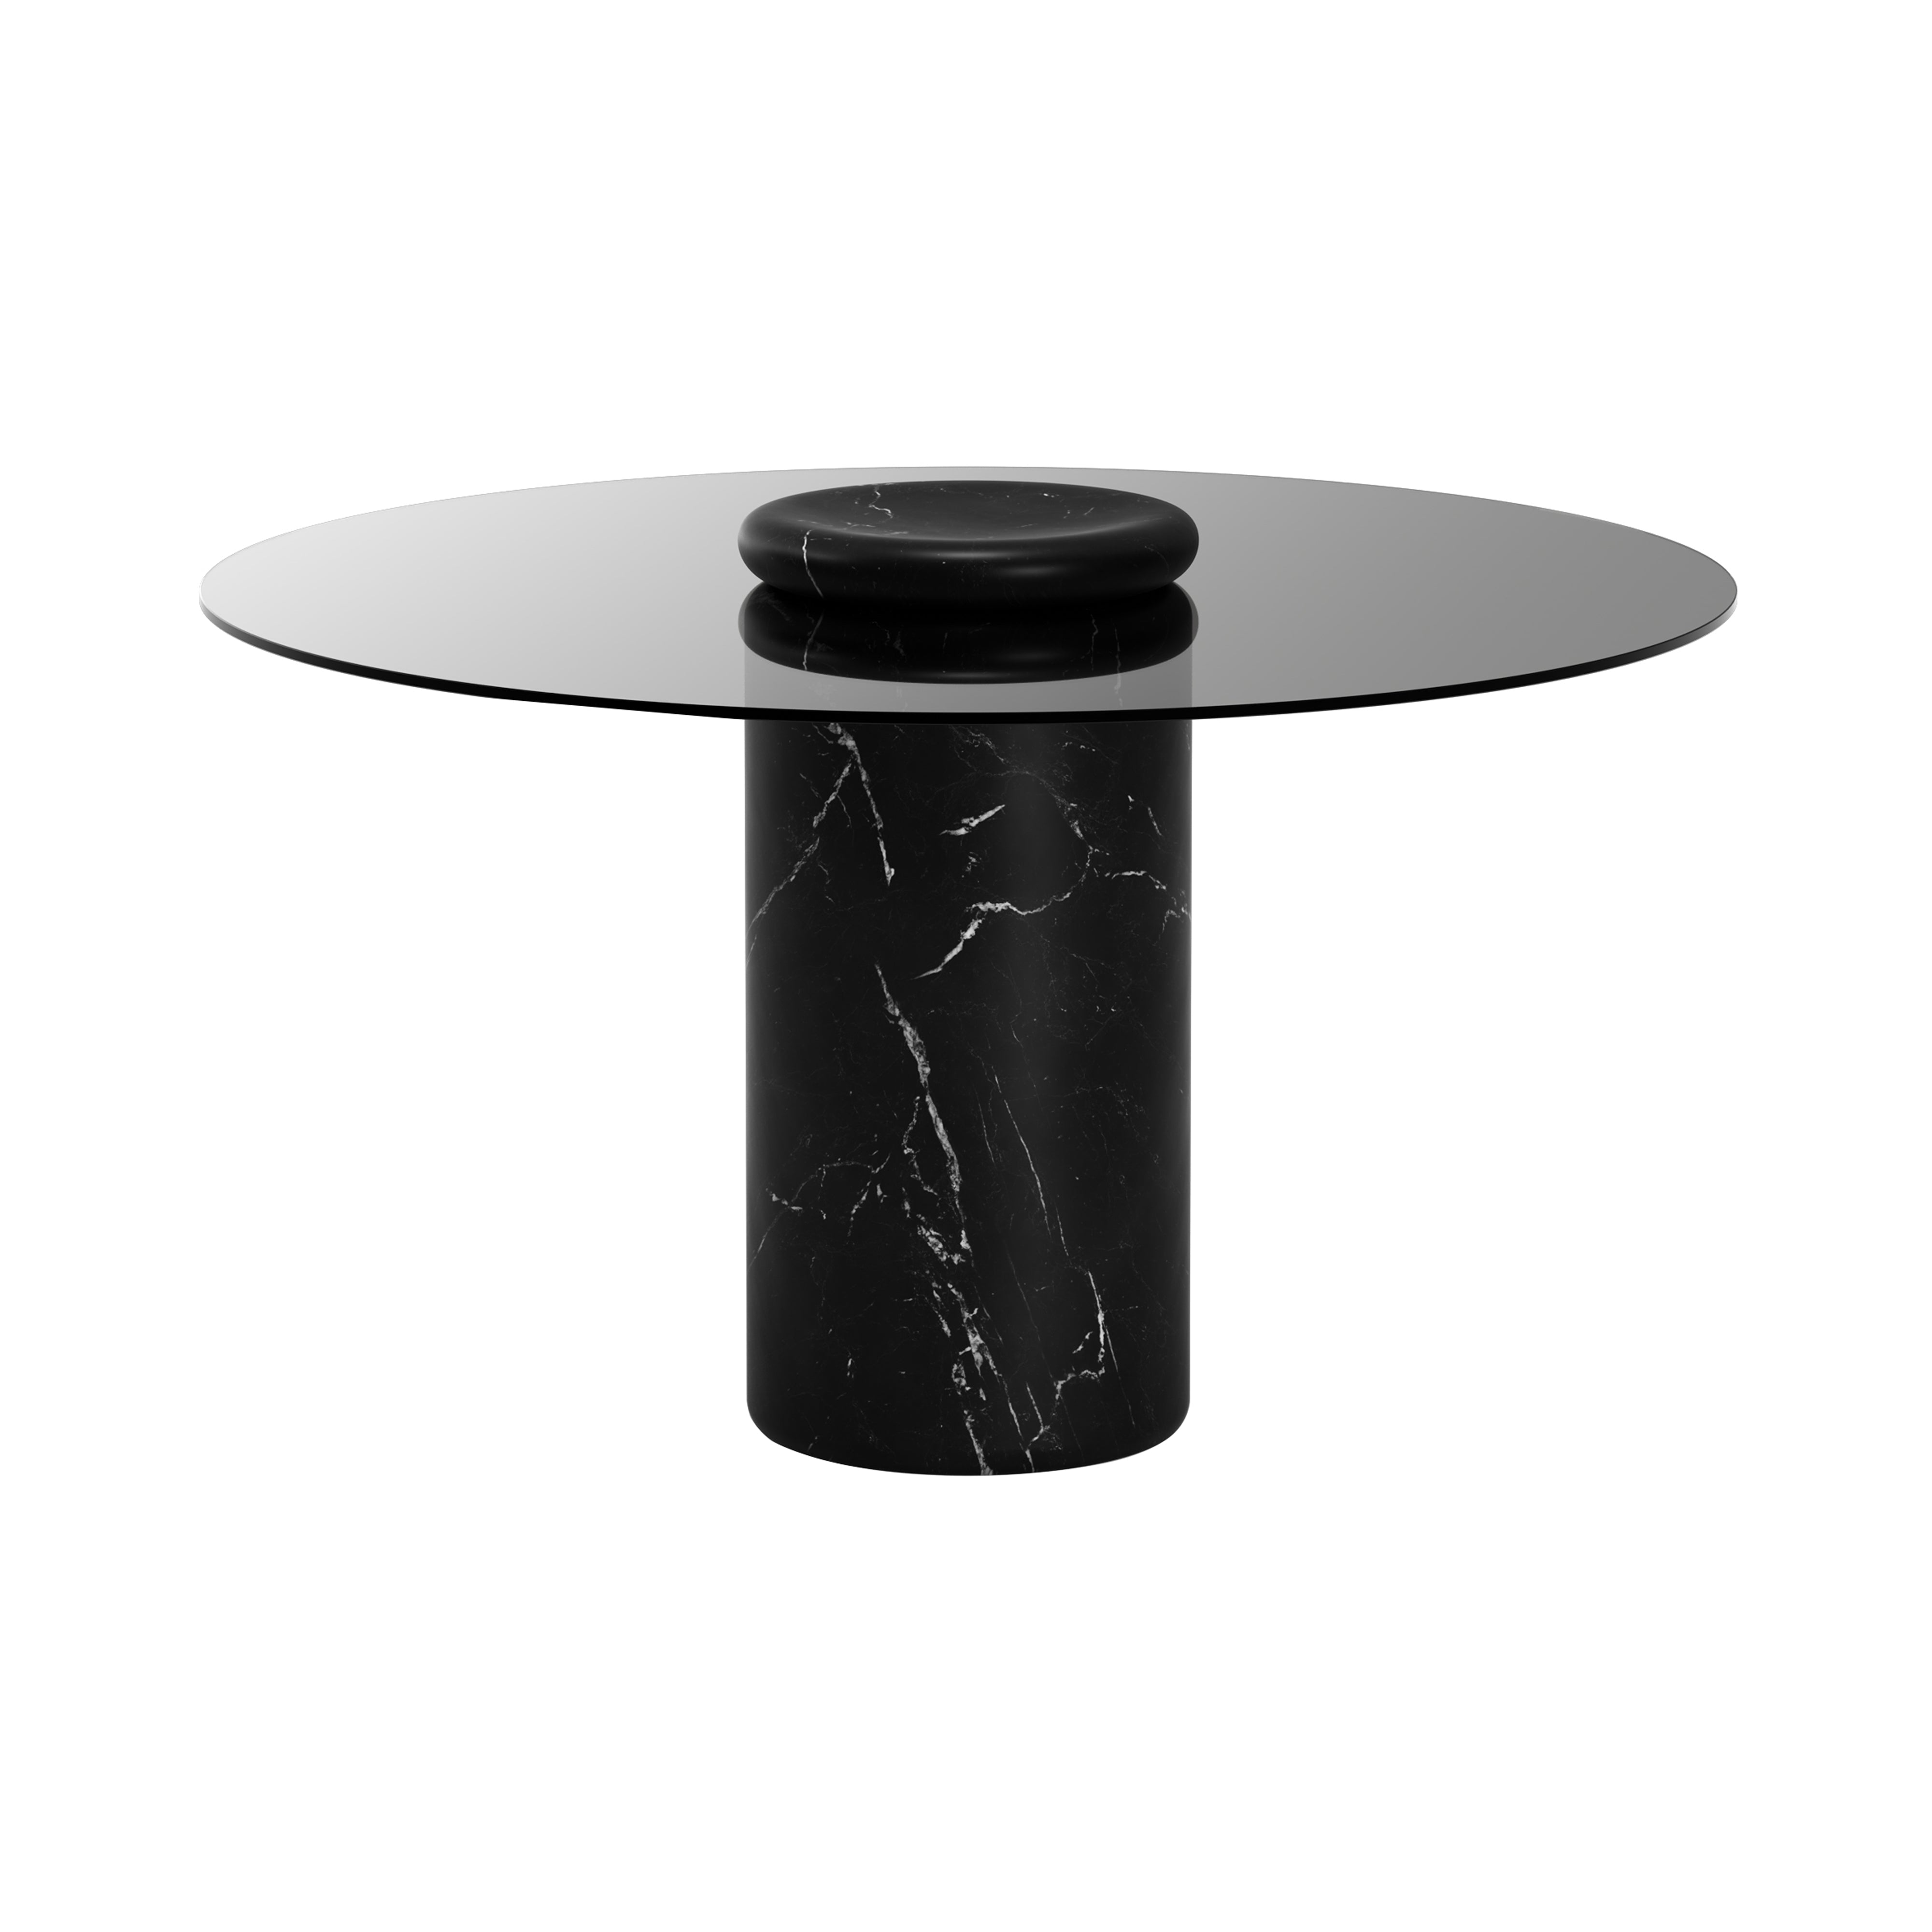 Castore Dining Table: Smoked Glass + Nero Marquina Marble